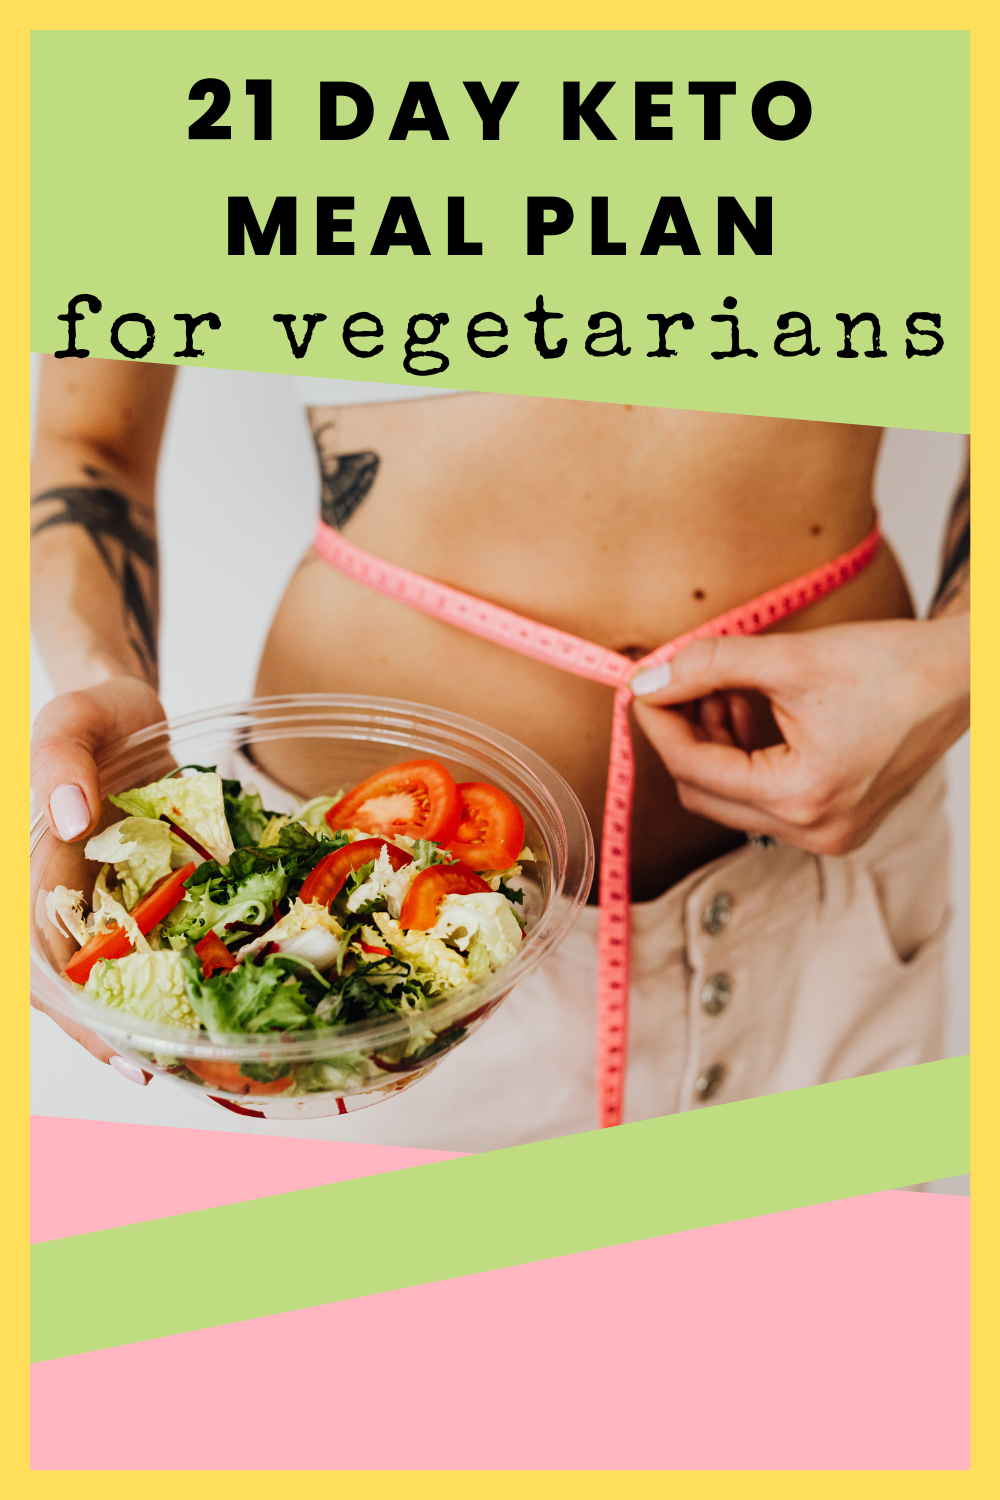 21 Day keto meal plan for Vegetarians: | by Healthyh | Medium